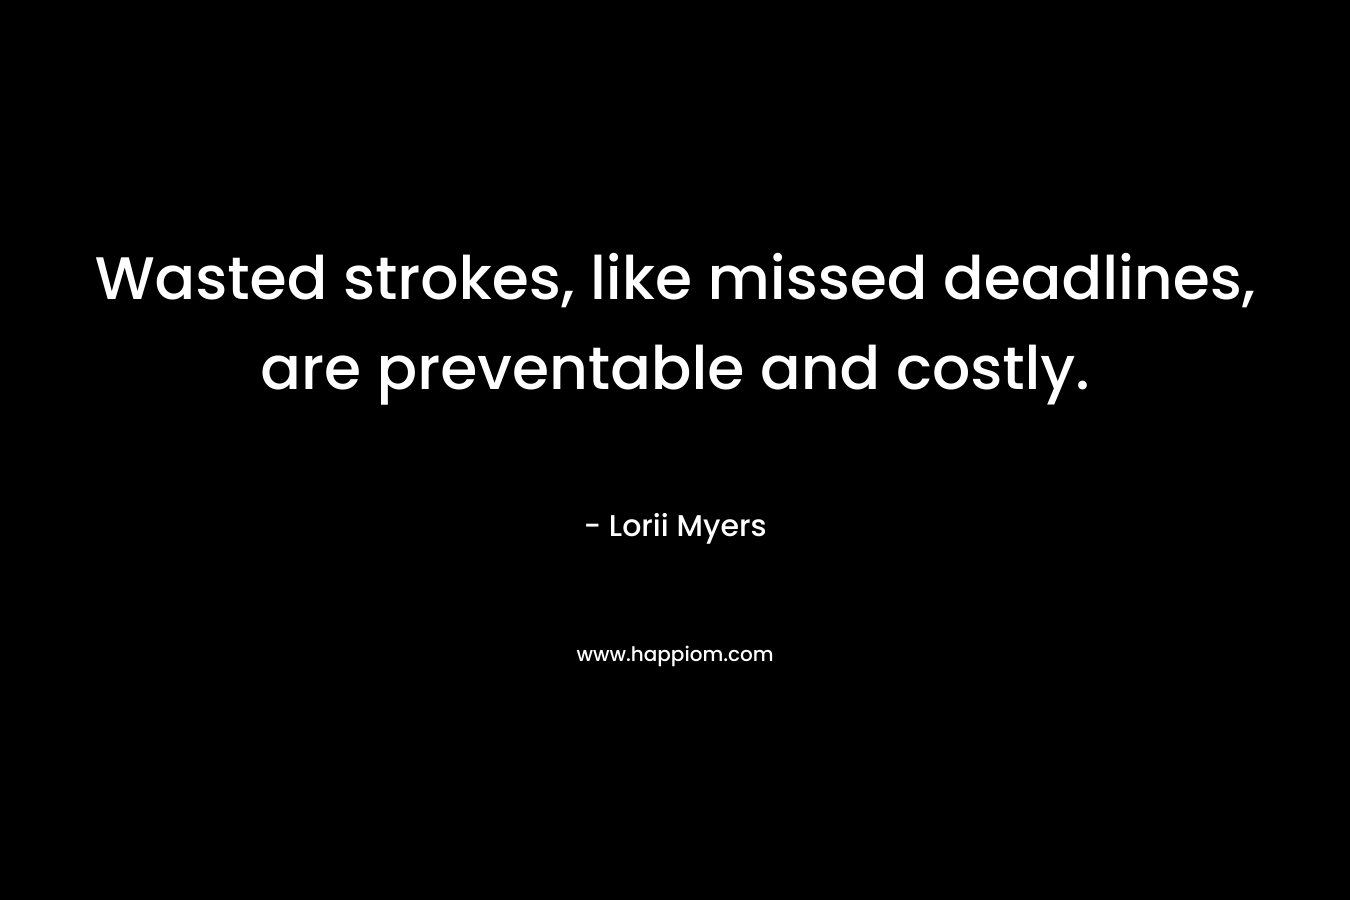 Wasted strokes, like missed deadlines, are preventable and costly.